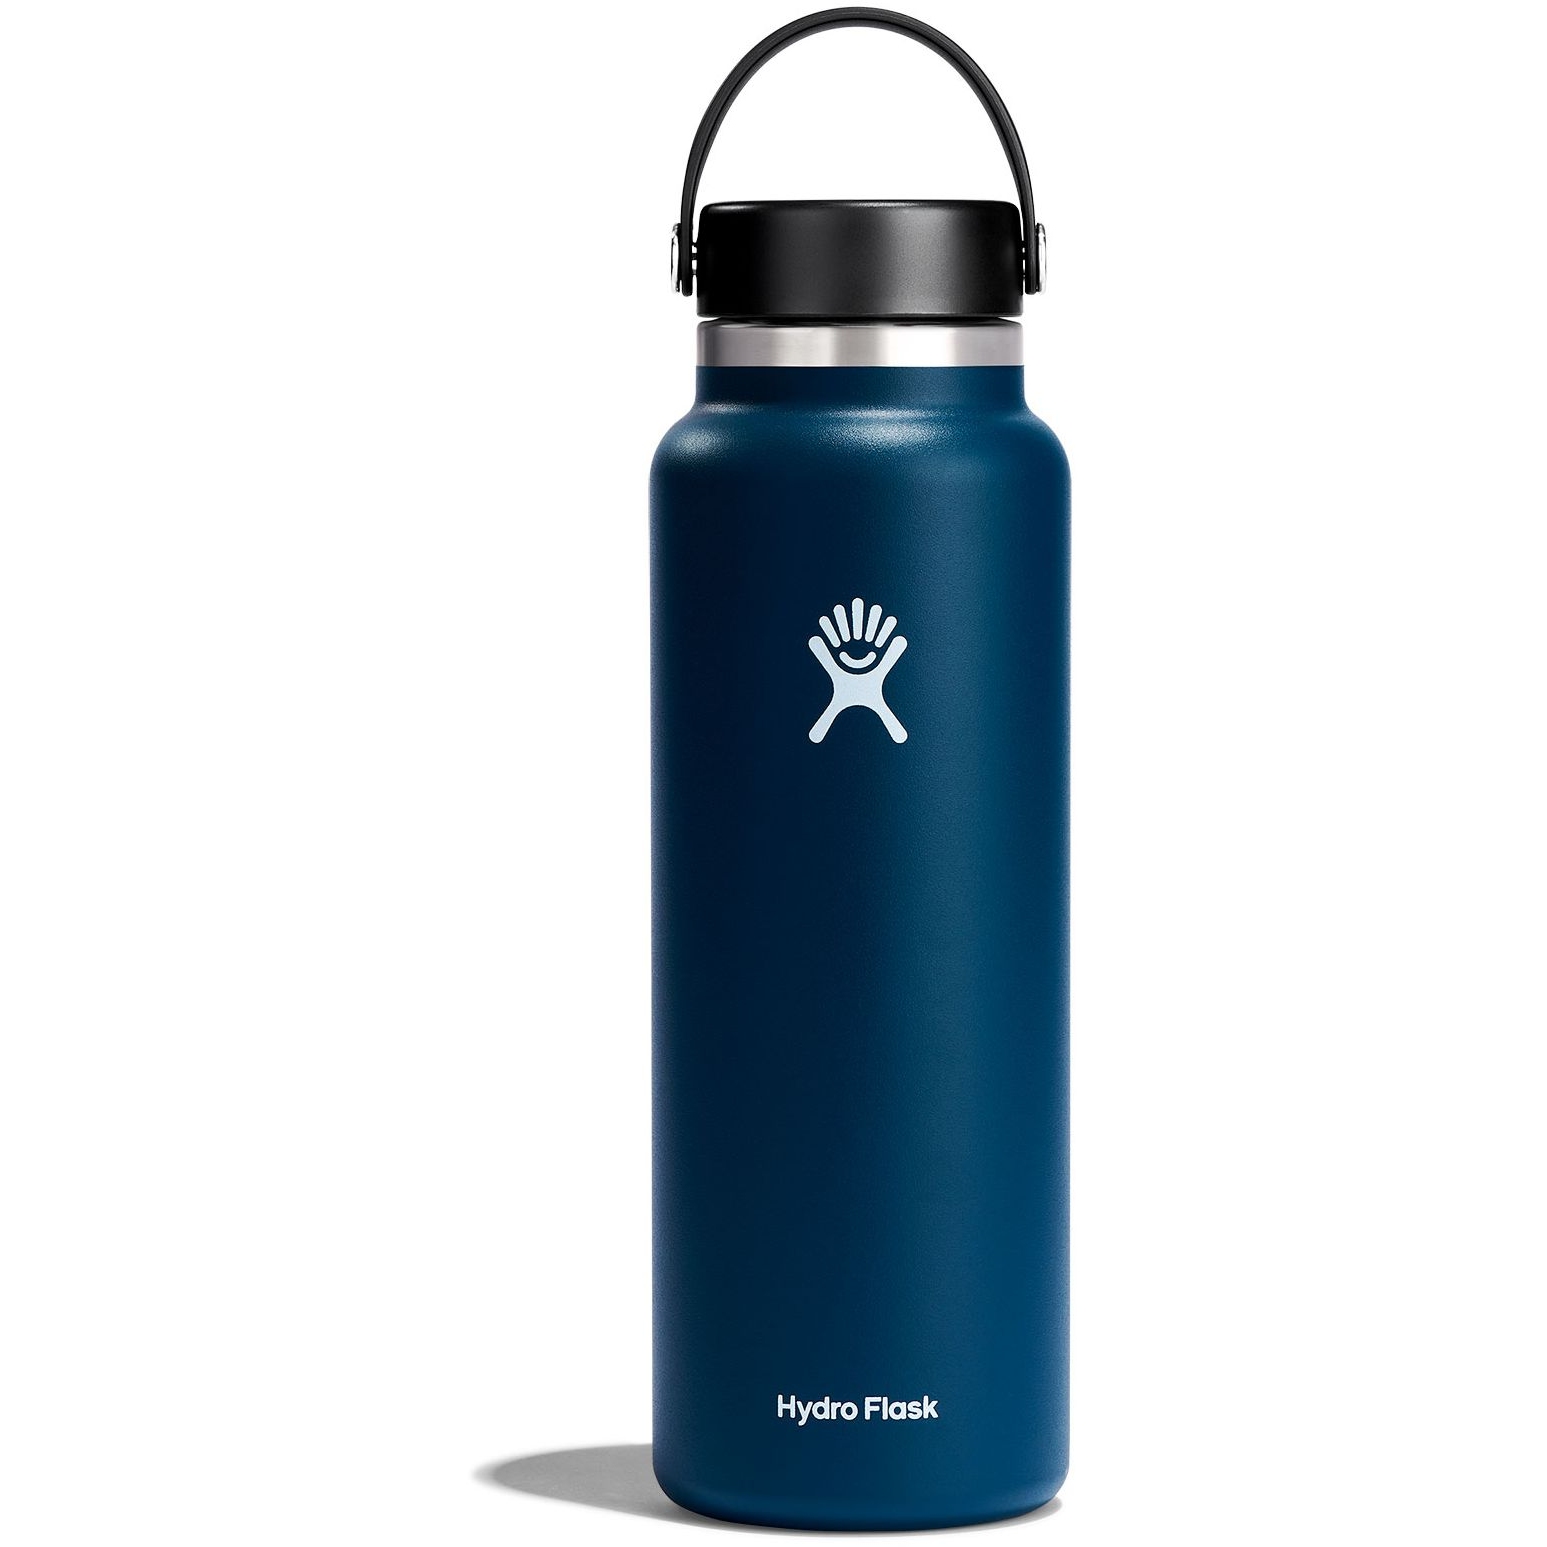 Picture of Hydro Flask 40 oz Wide Mouth Insulated Bottle + Flex Cap - 1182 ml - Indigo